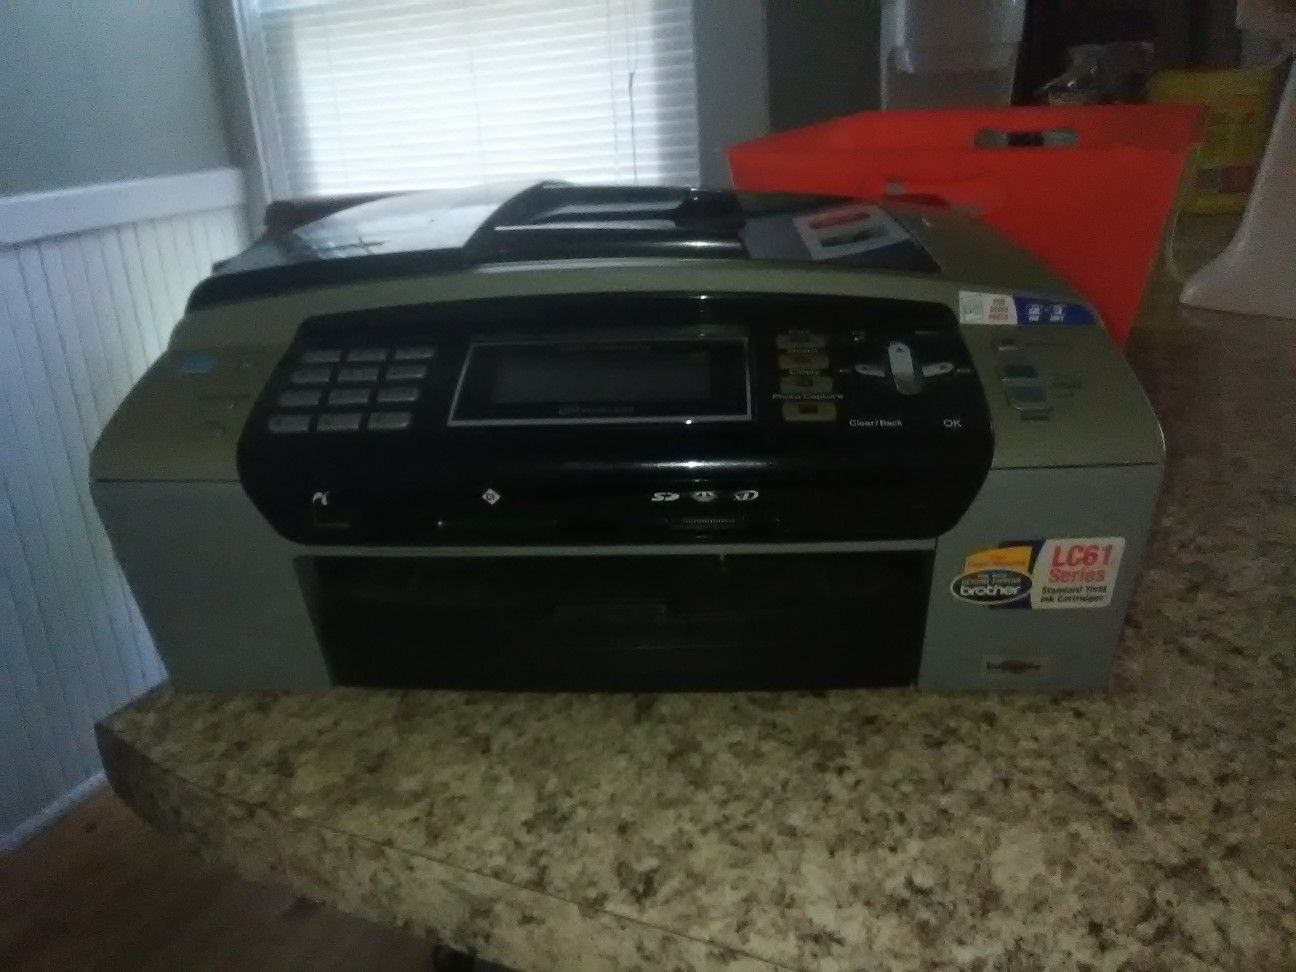 Brothers three in one printer scanner fax machine